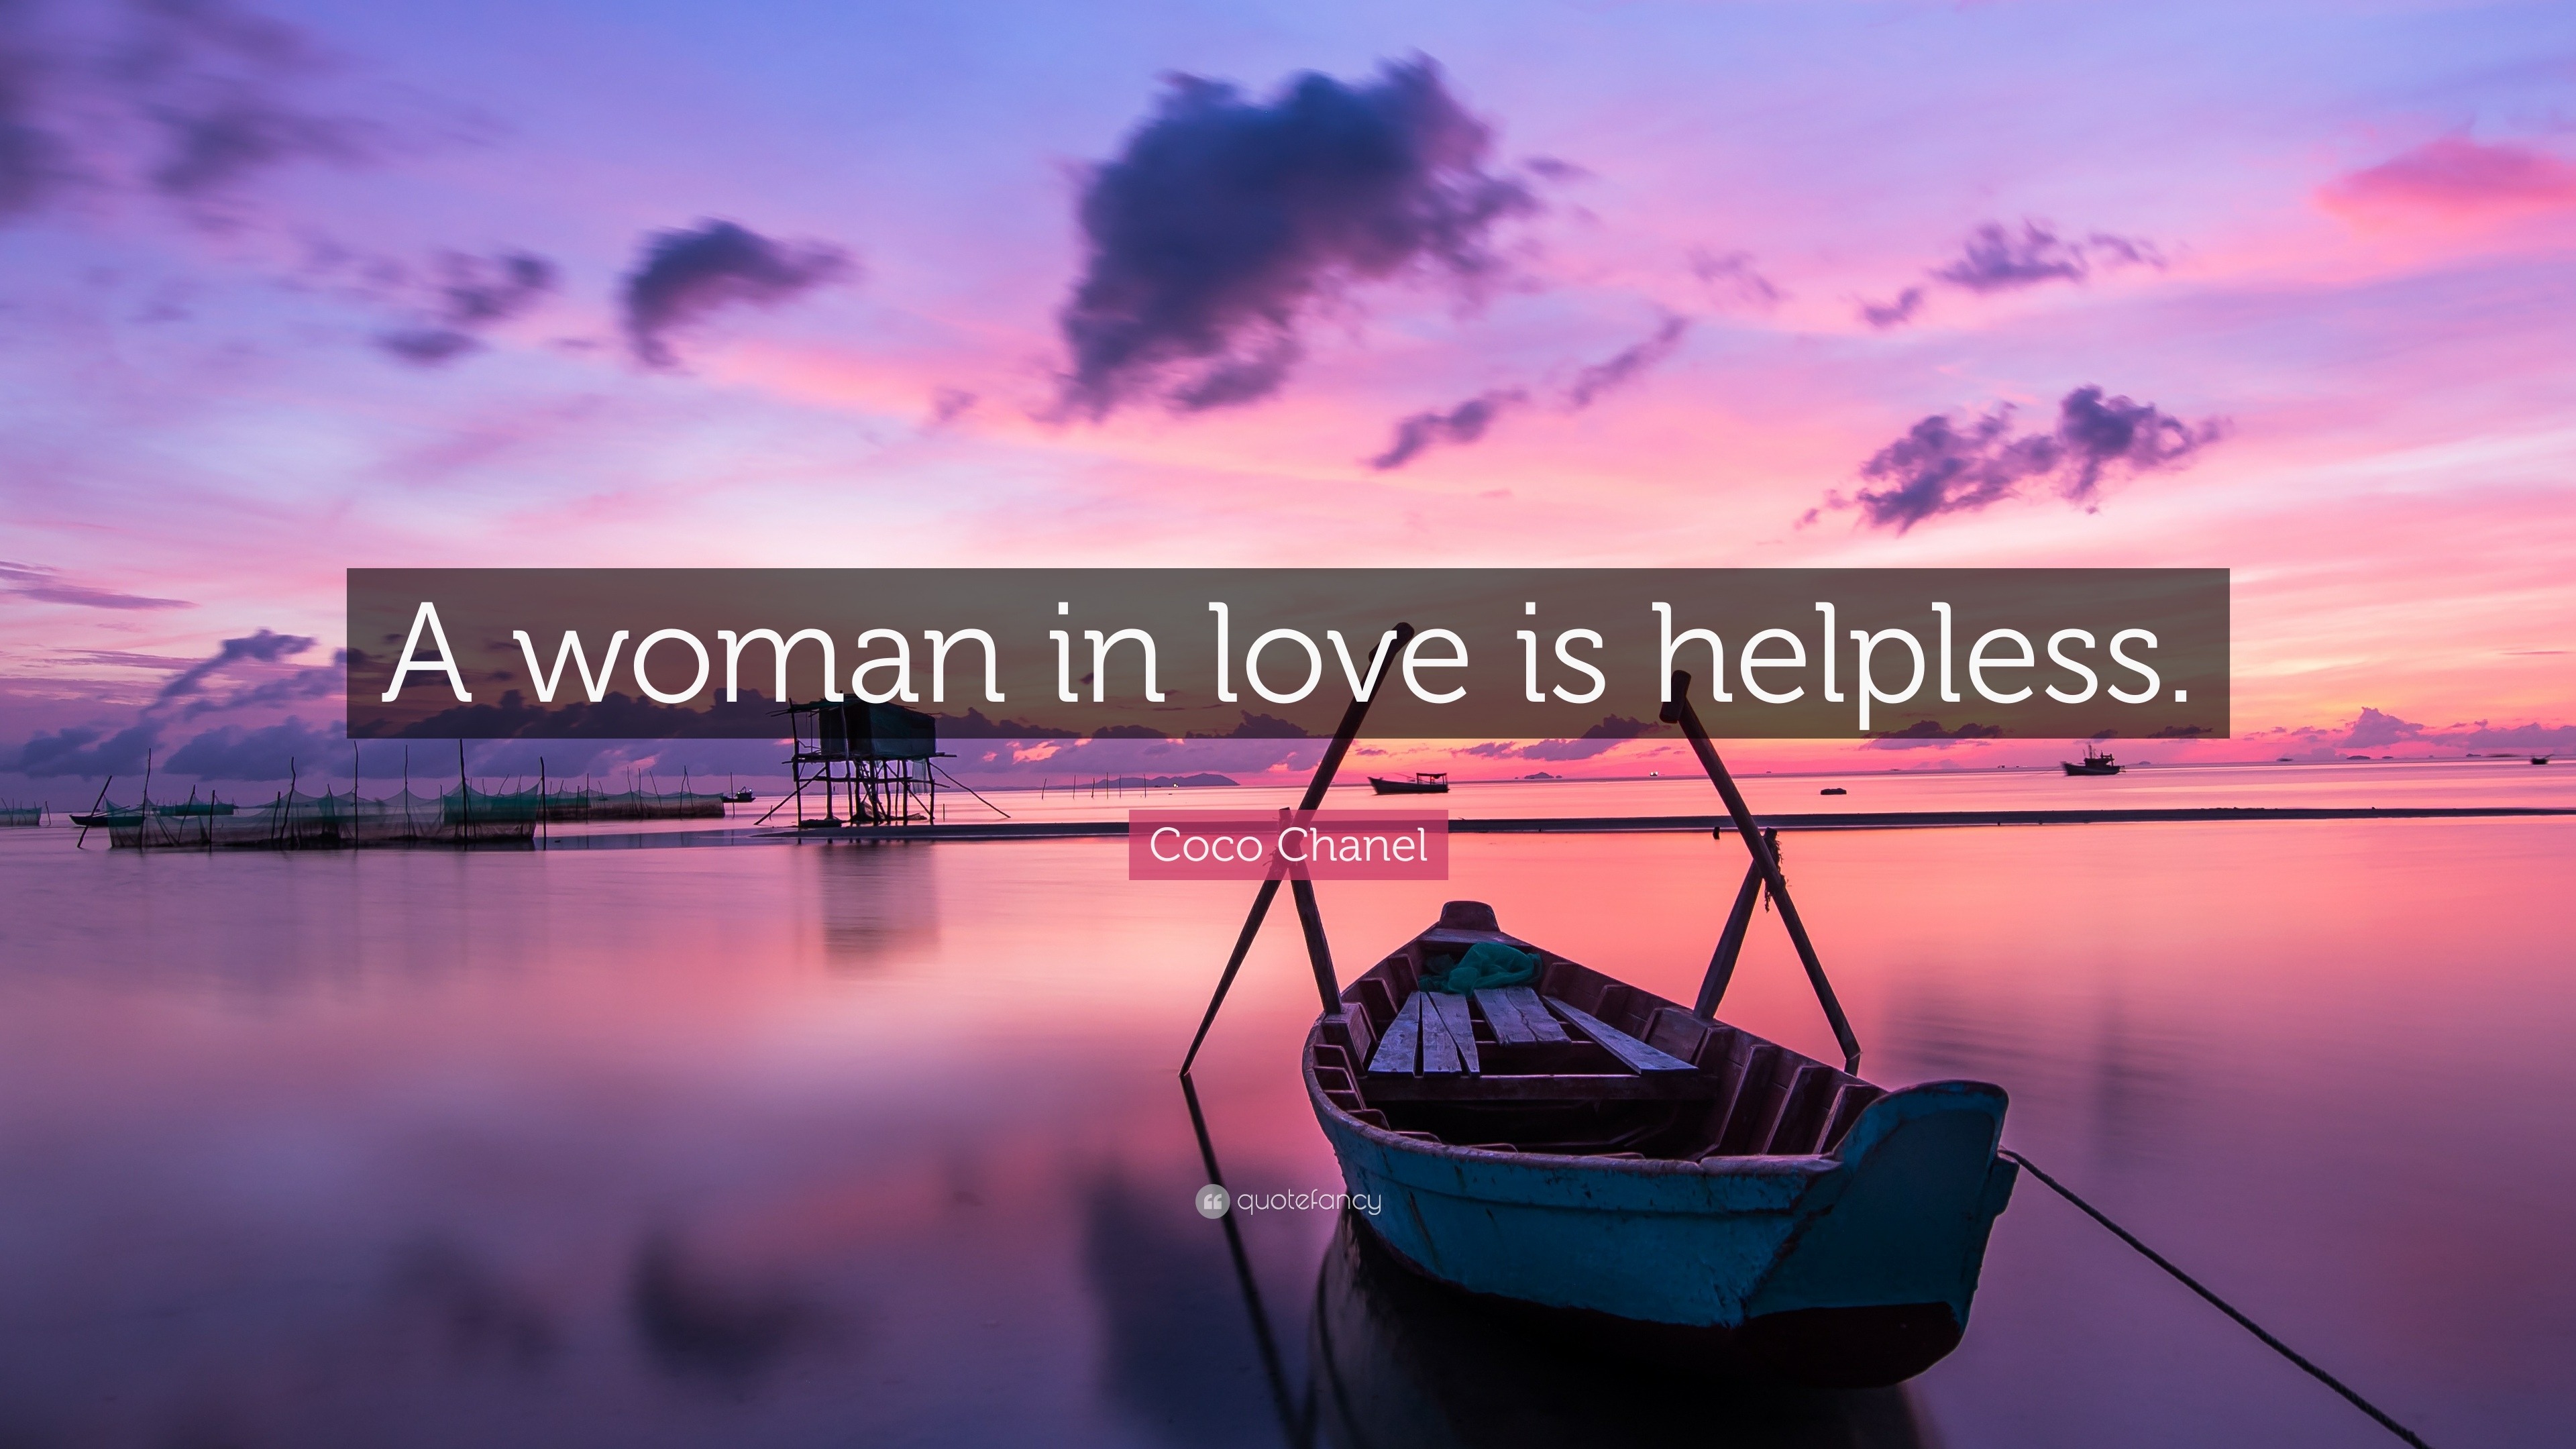 Coco Chanel Quote: “A woman in love is helpless.”